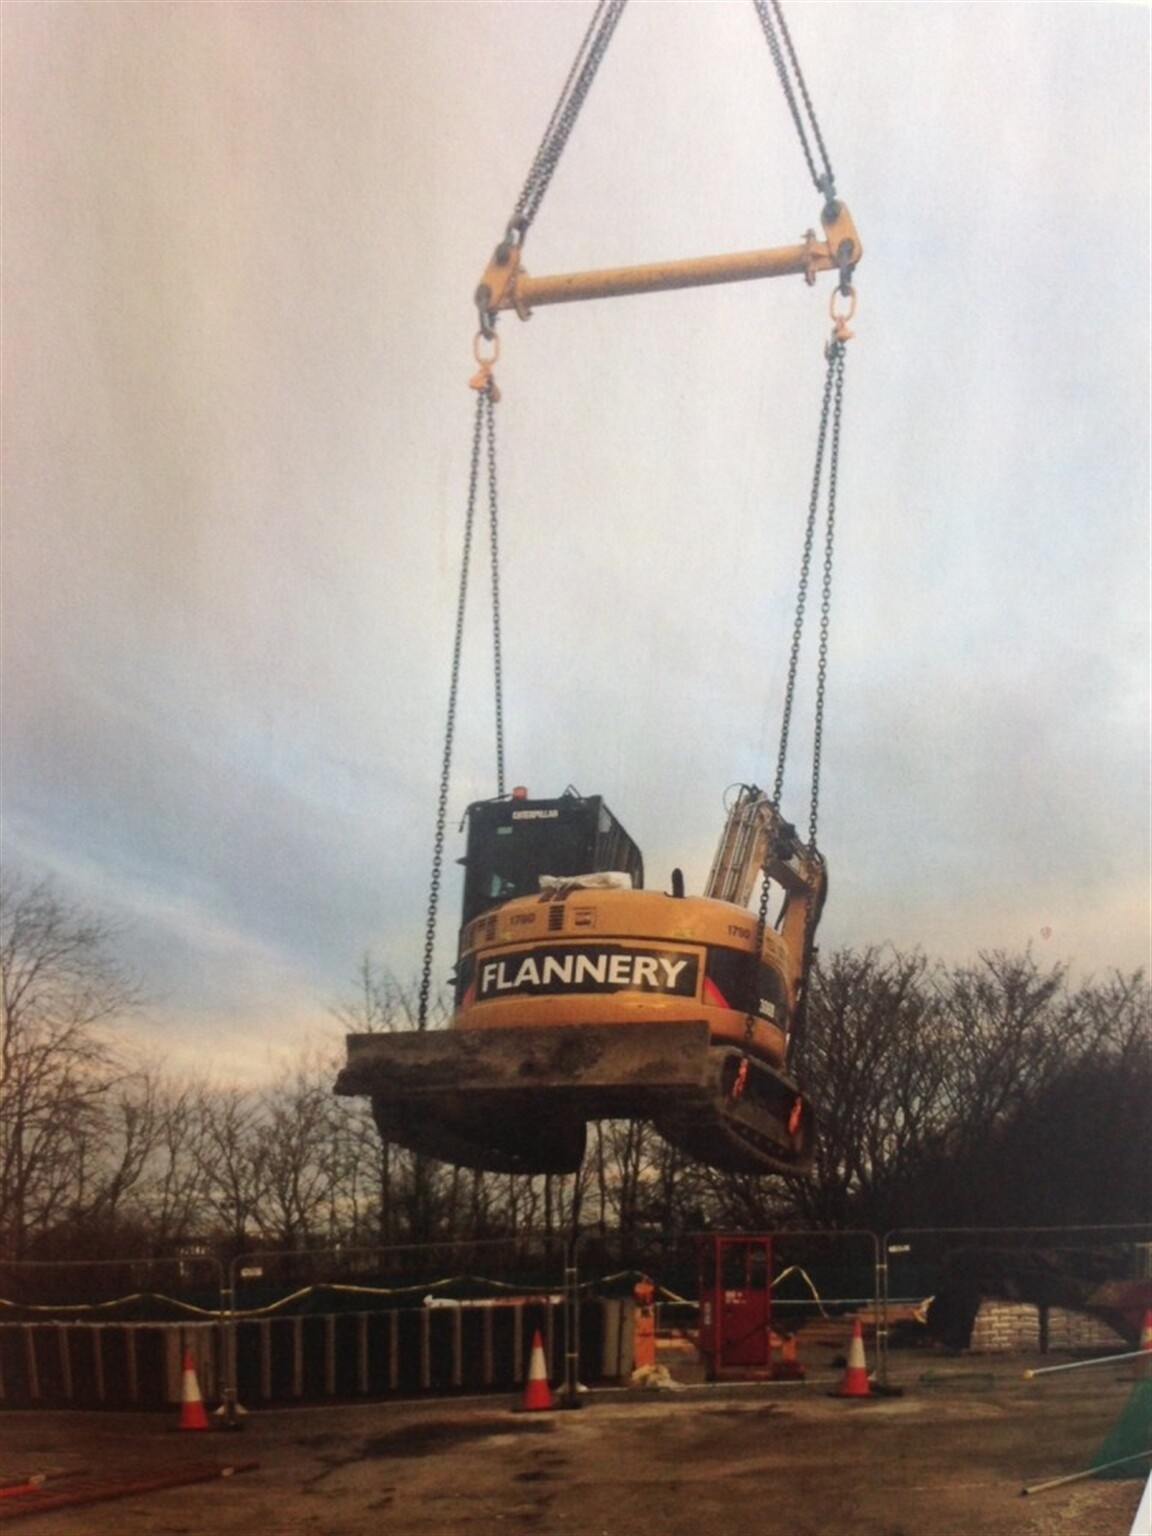 Flannerys flying Cat excavator